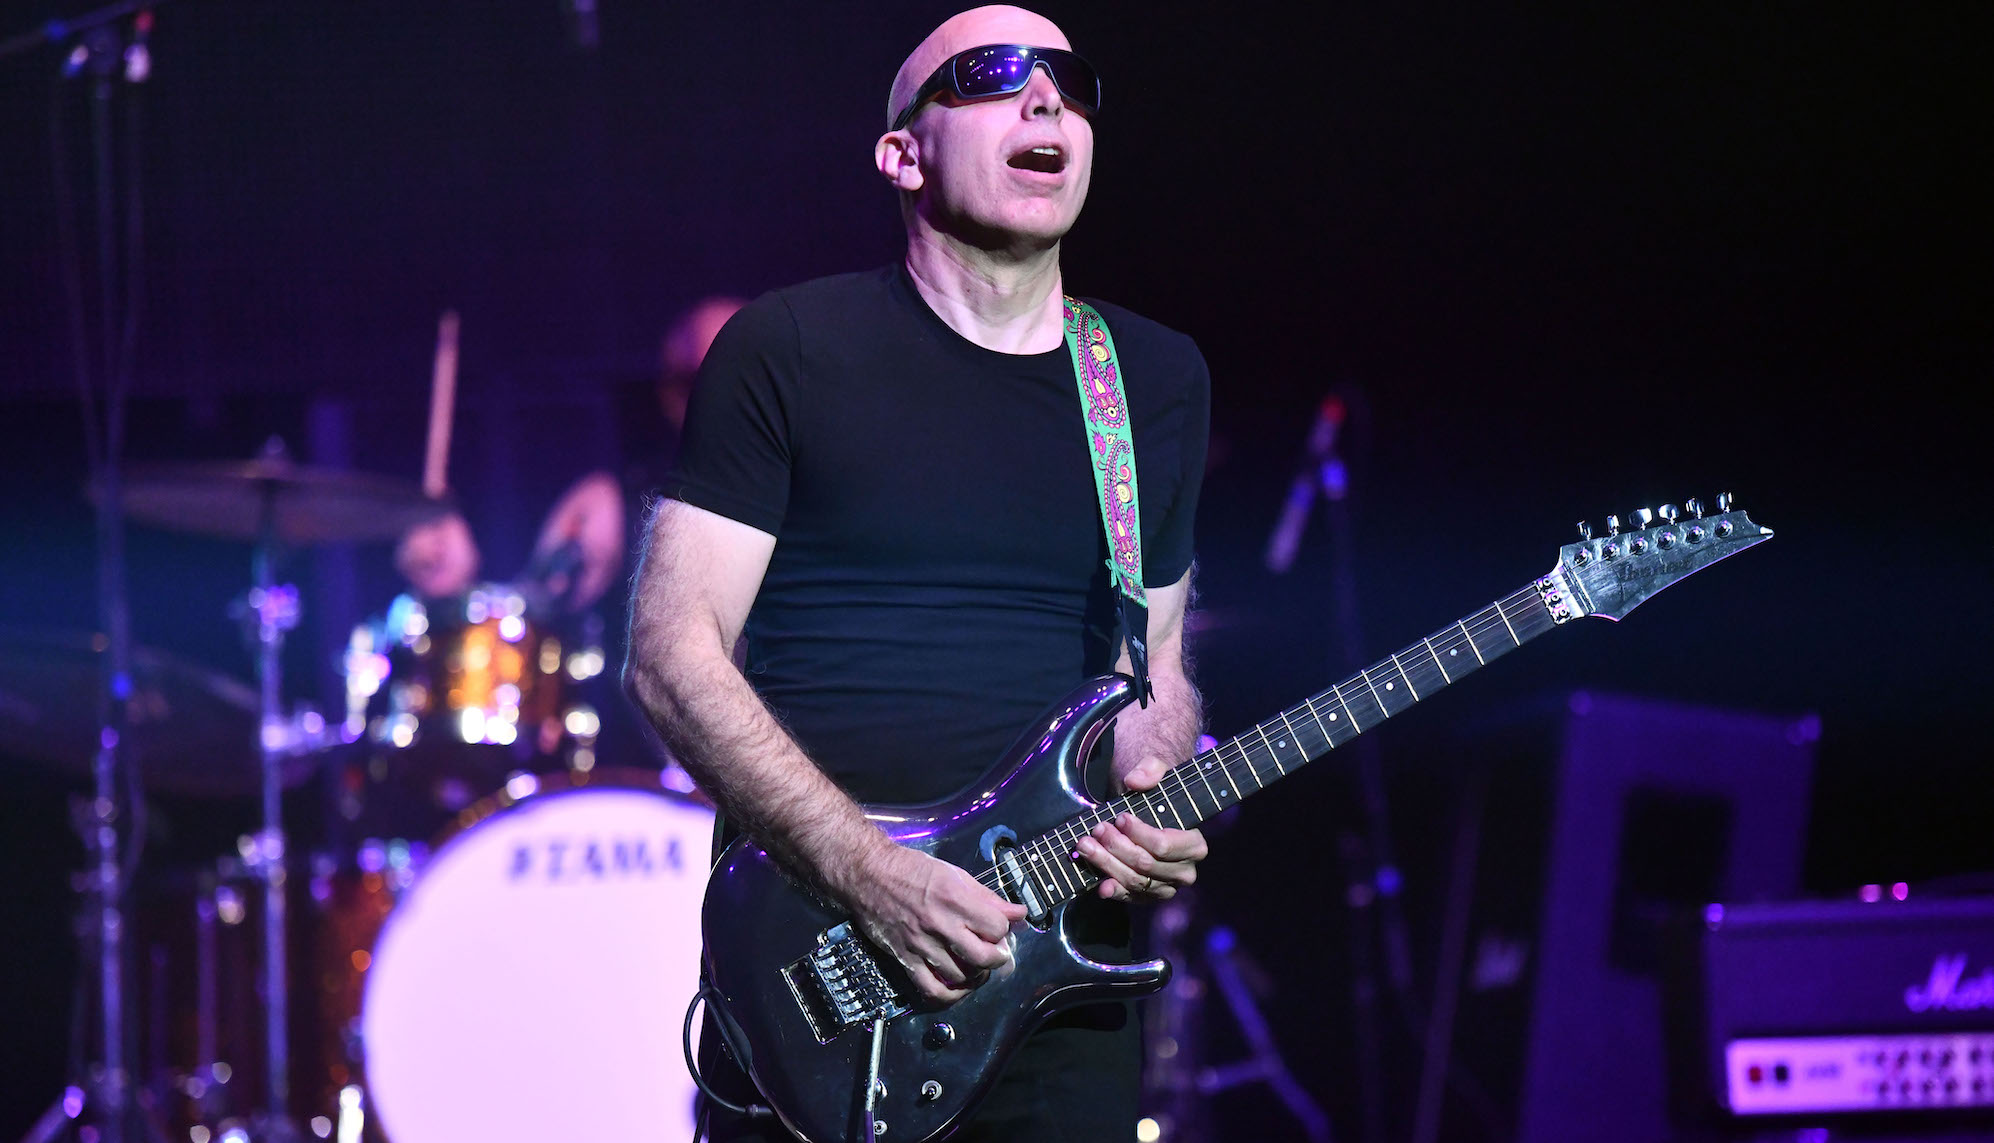 Joe Satriani addresses Van Halen tribute tour reports: "If it ever does happen, it would be a great honor and a terrifying challenge" thumbnail